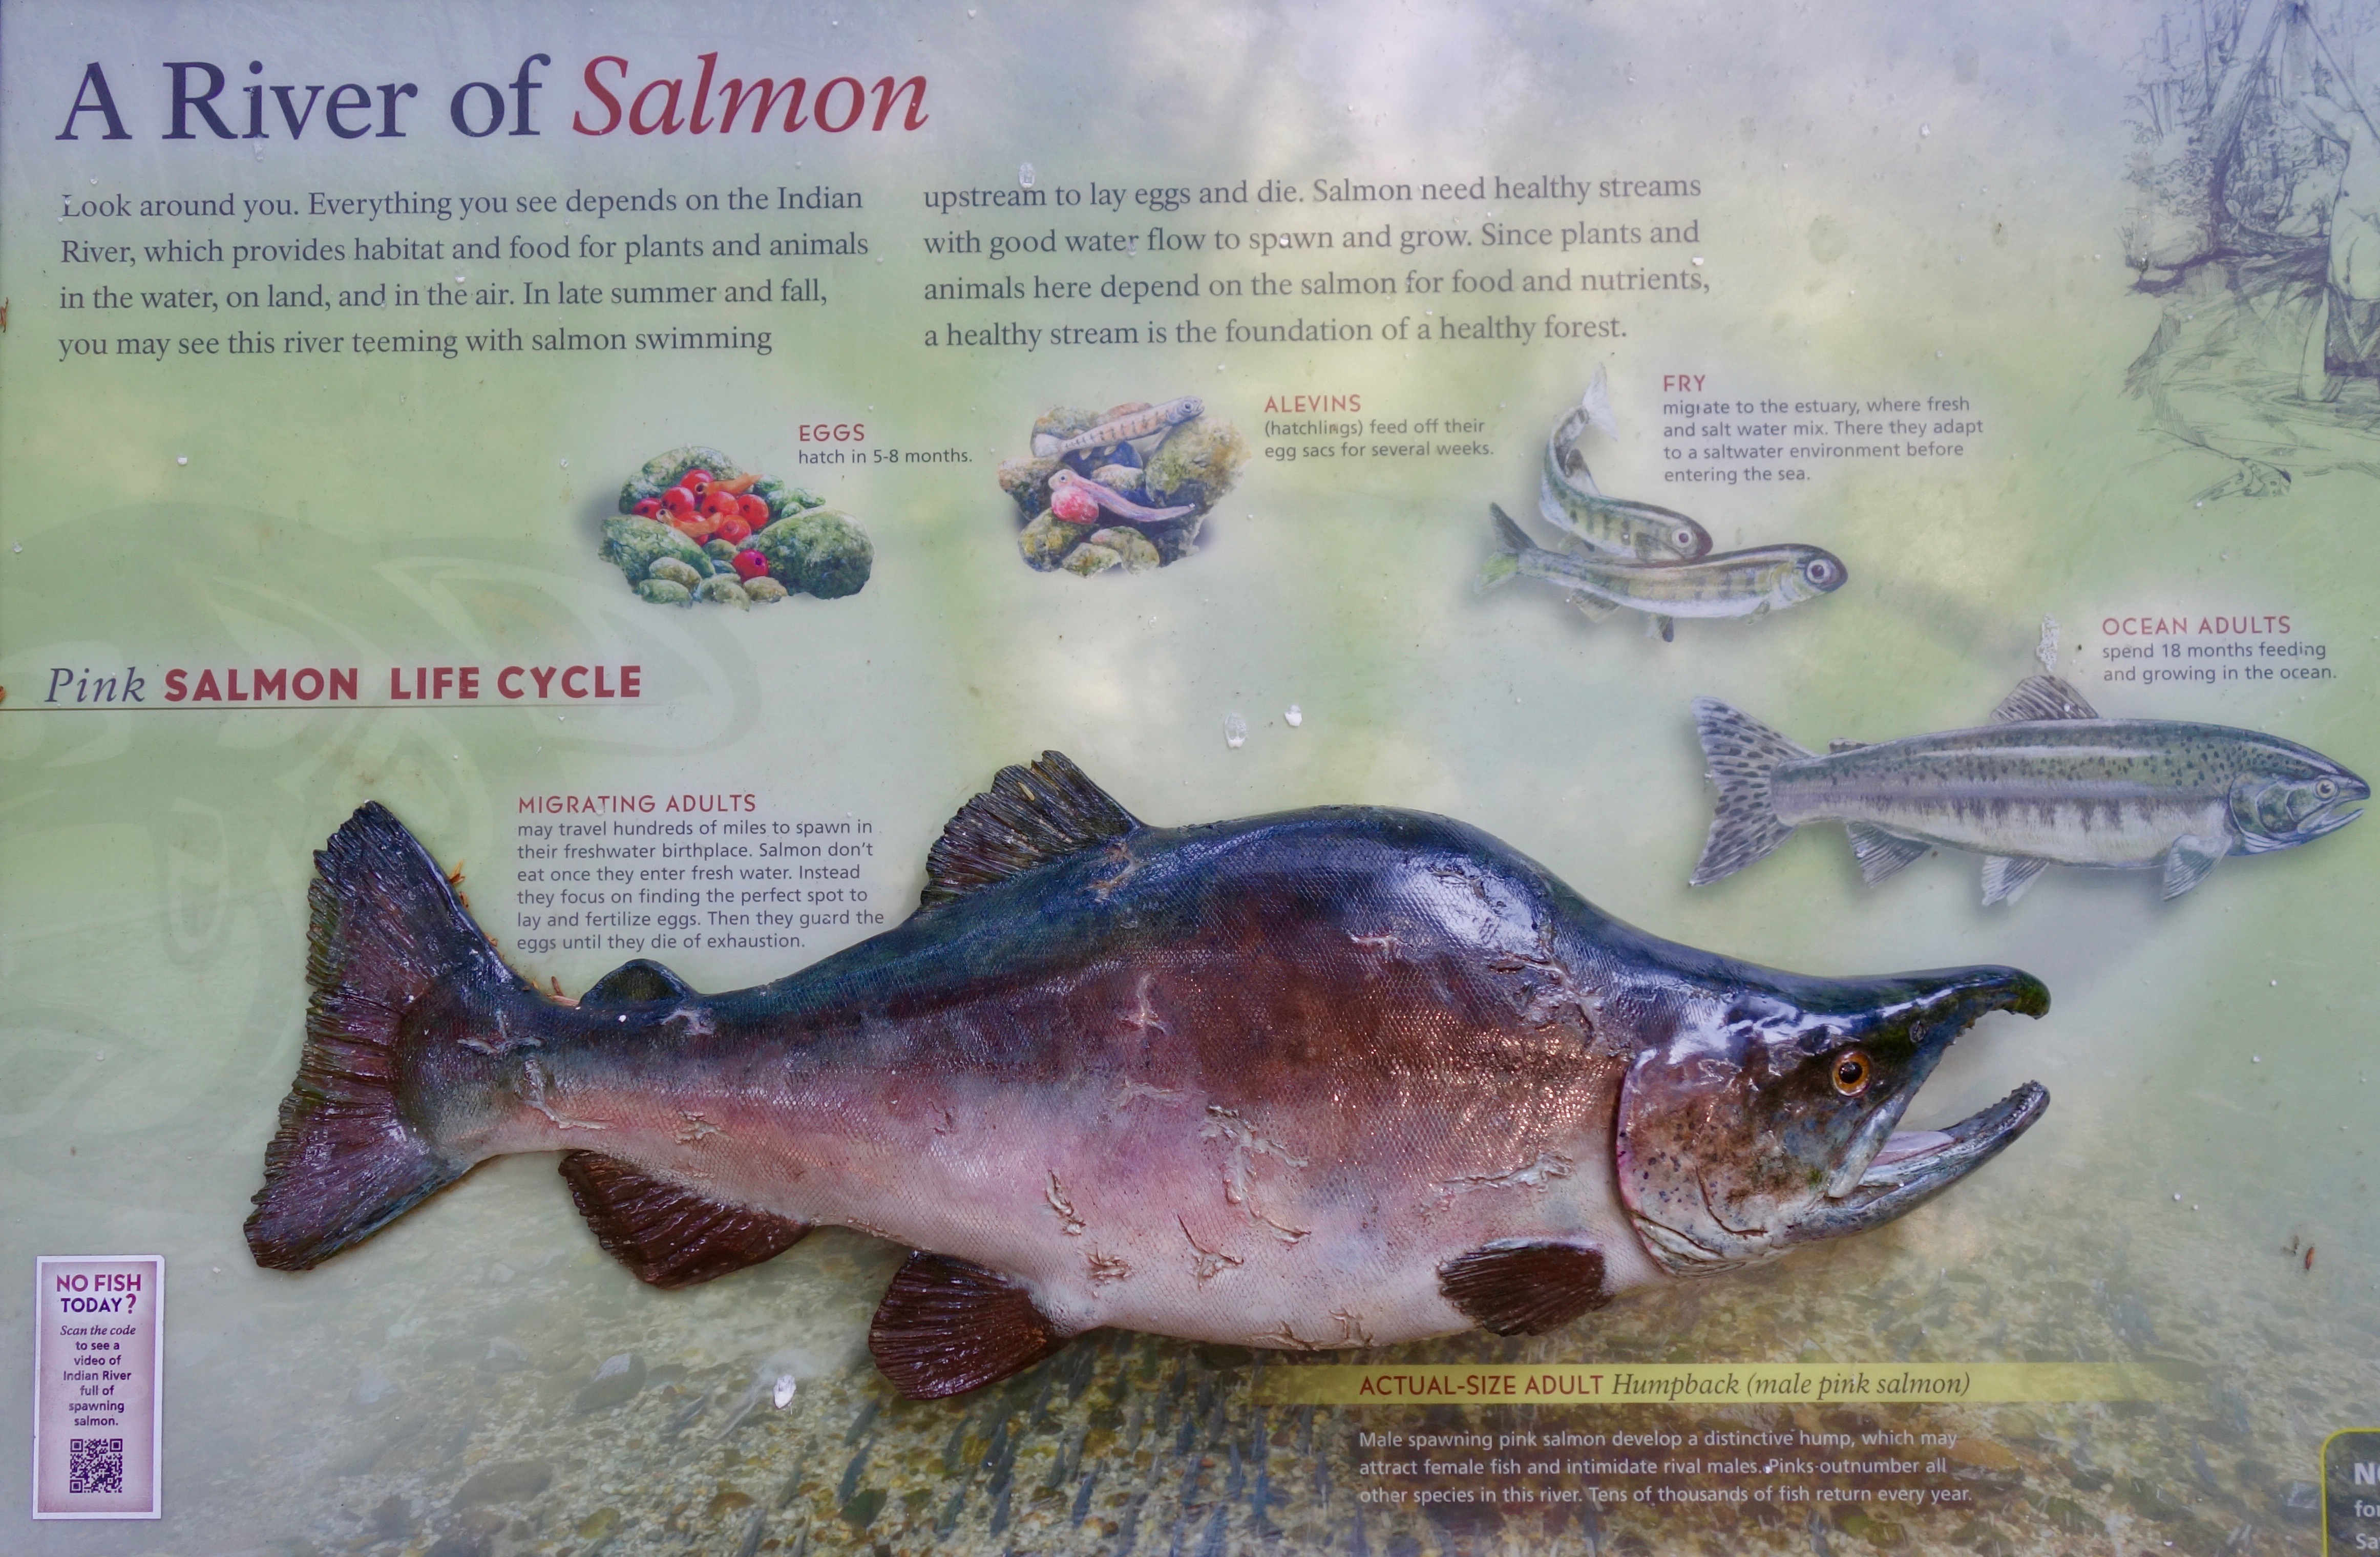 A placard showing the life cycle of the pink salmon, which happen to be the species we see on this day. 